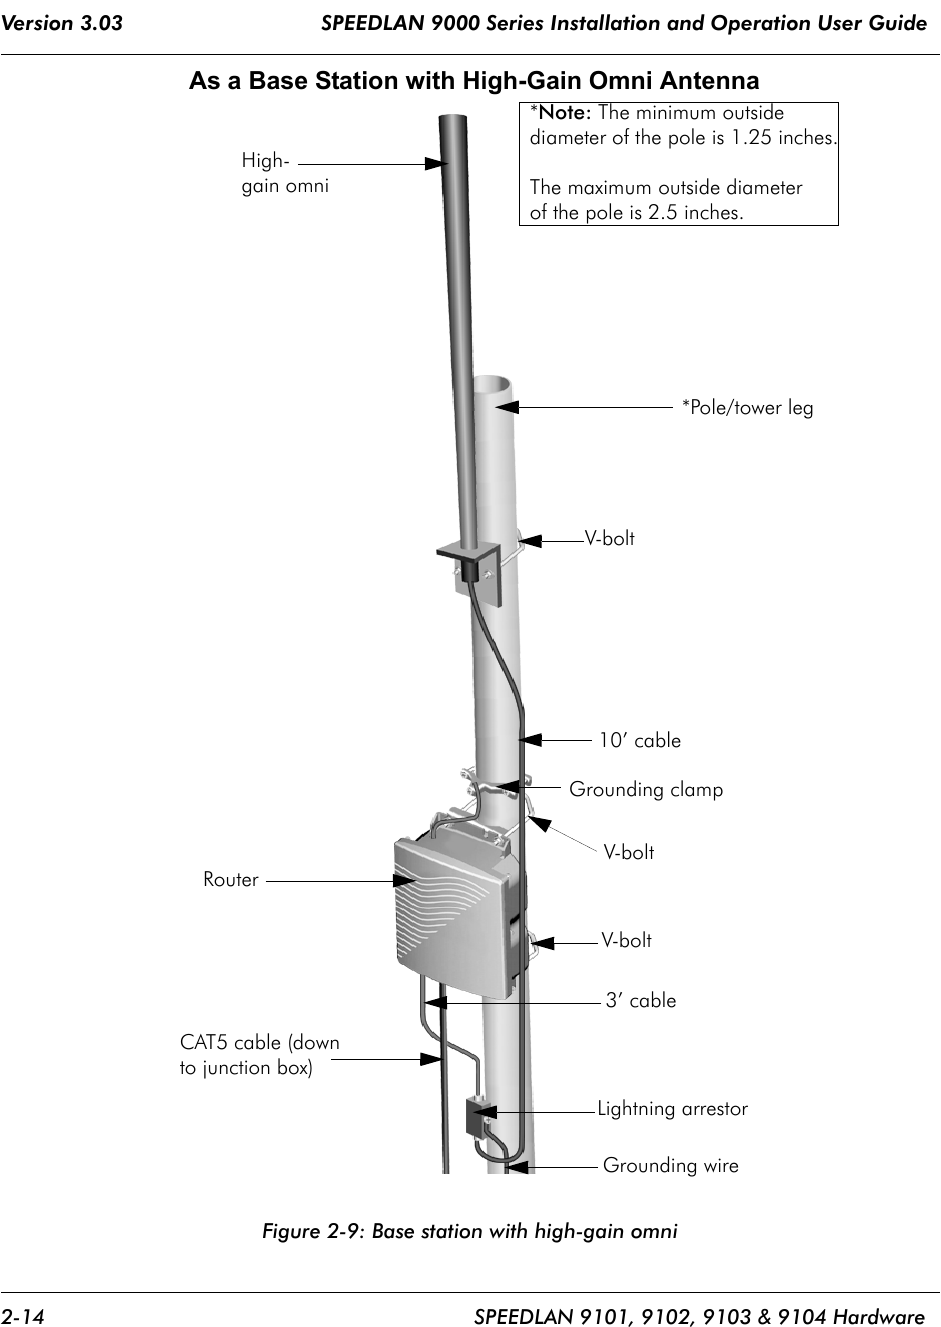 Version 3.03                                SPEEDLAN 9000 Series Installation and Operation User Guide 2-14 SPEEDLAN 9101, 9102, 9103 &amp; 9104 HardwareAs a Base Station with High-Gain Omni AntennaFigure 2-9: Base station with high-gain omni  High-*Pole/tower leg V-bolt 10’ cable3’ cableLightning arrestorGrounding wire  CAT5 cable (downto junction box)  V-bolt V-bolt   Grounding clamp Router*Note: The minimum outsidediameter of the pole is 1.25 inches.The maximum outside diameterof the pole is 2.5 inches.gain omni